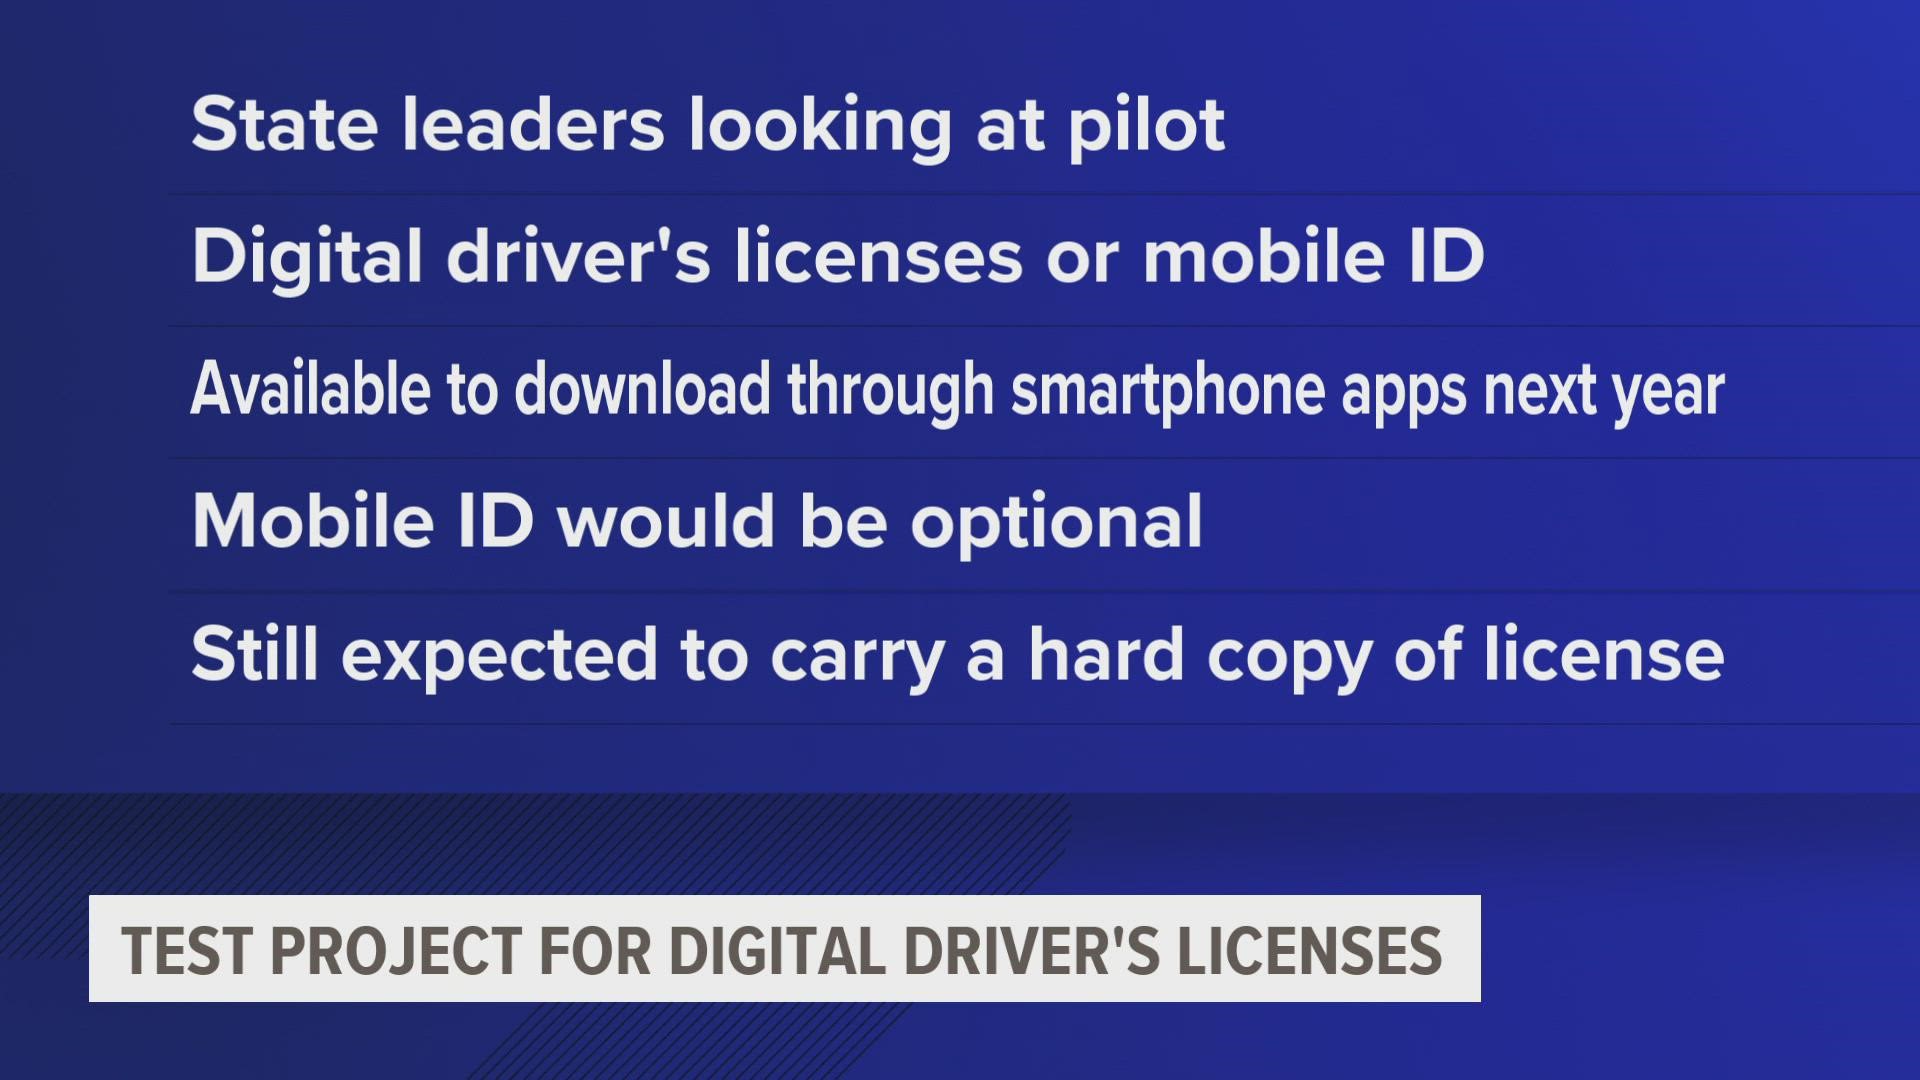 State officials have begun a pilot project to make digital driver’s licenses available for download via smartphone apps sometime in 2022.